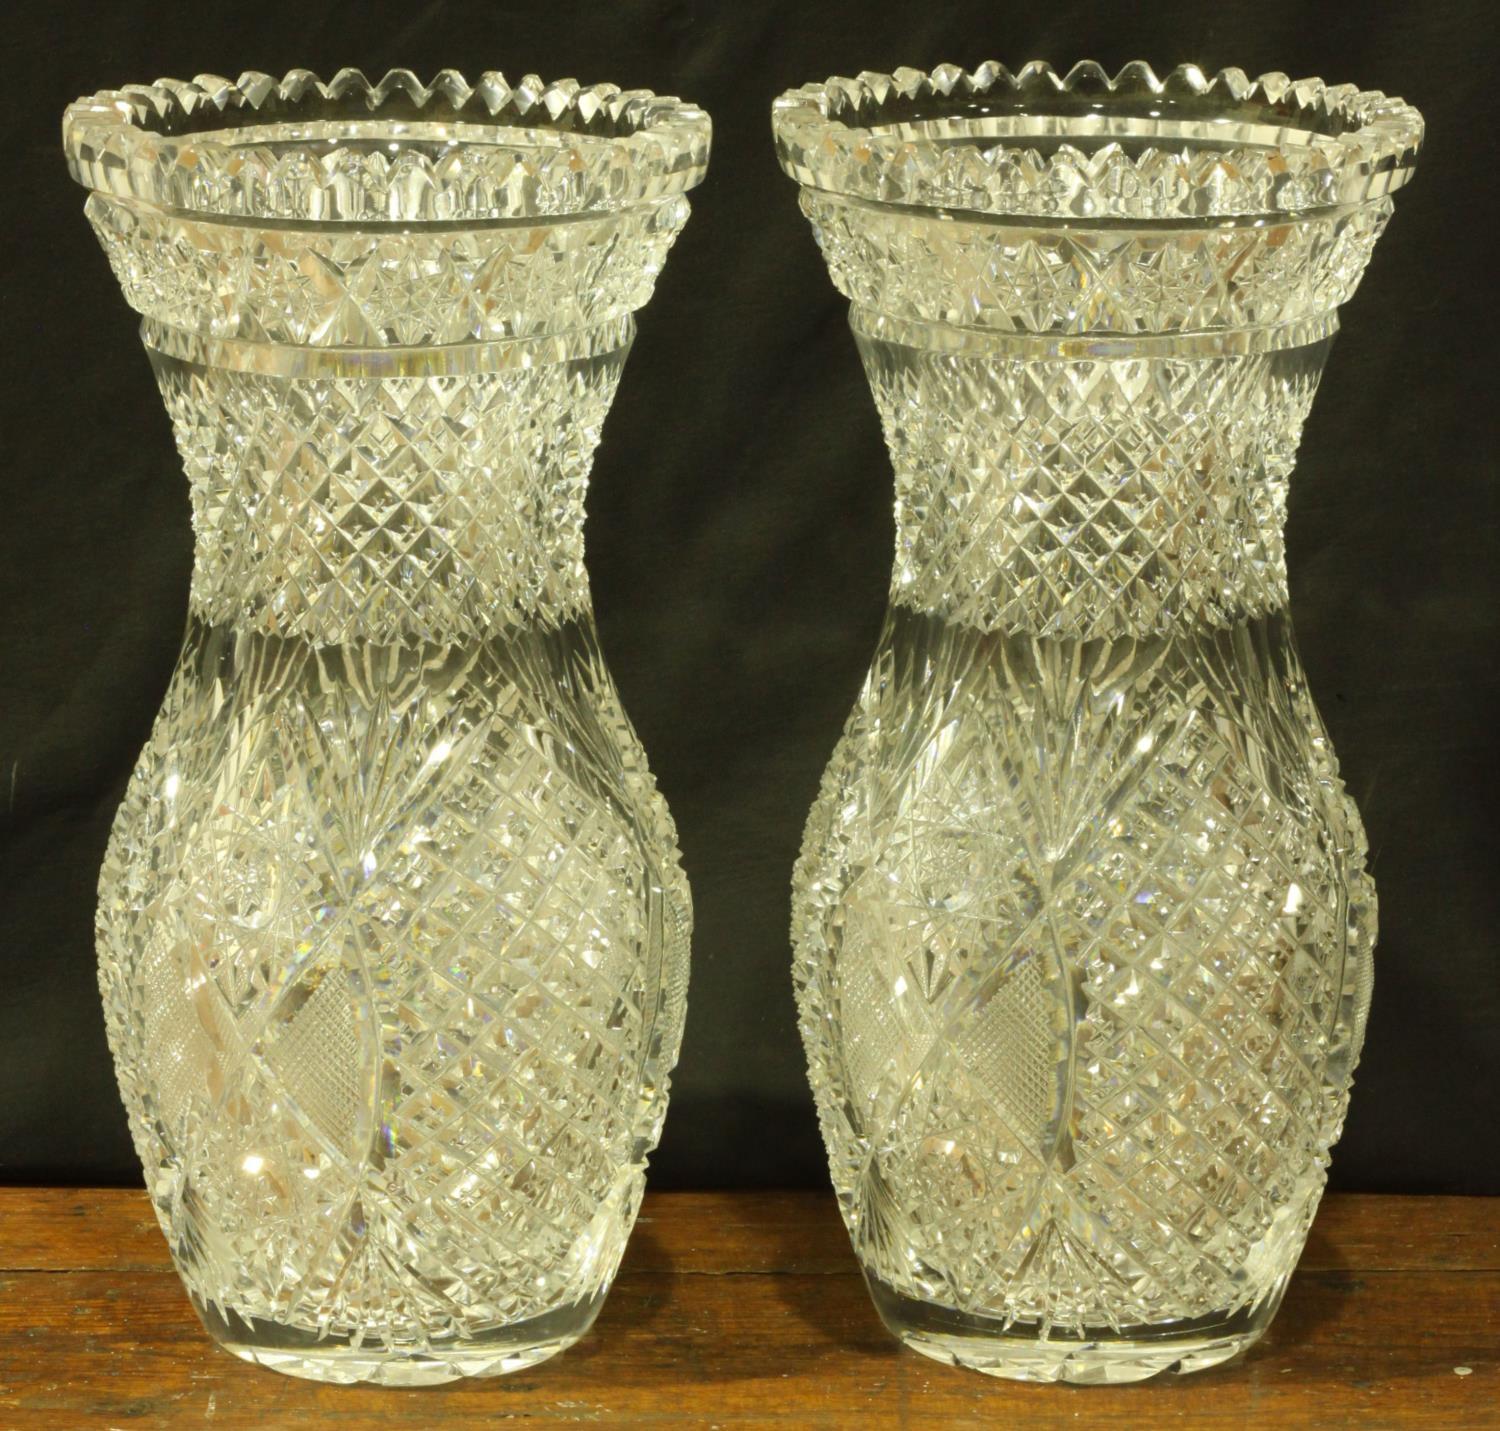 A pair of good quality, heavy, cut glass vases, possibly Waterford, of oval form with flared necks